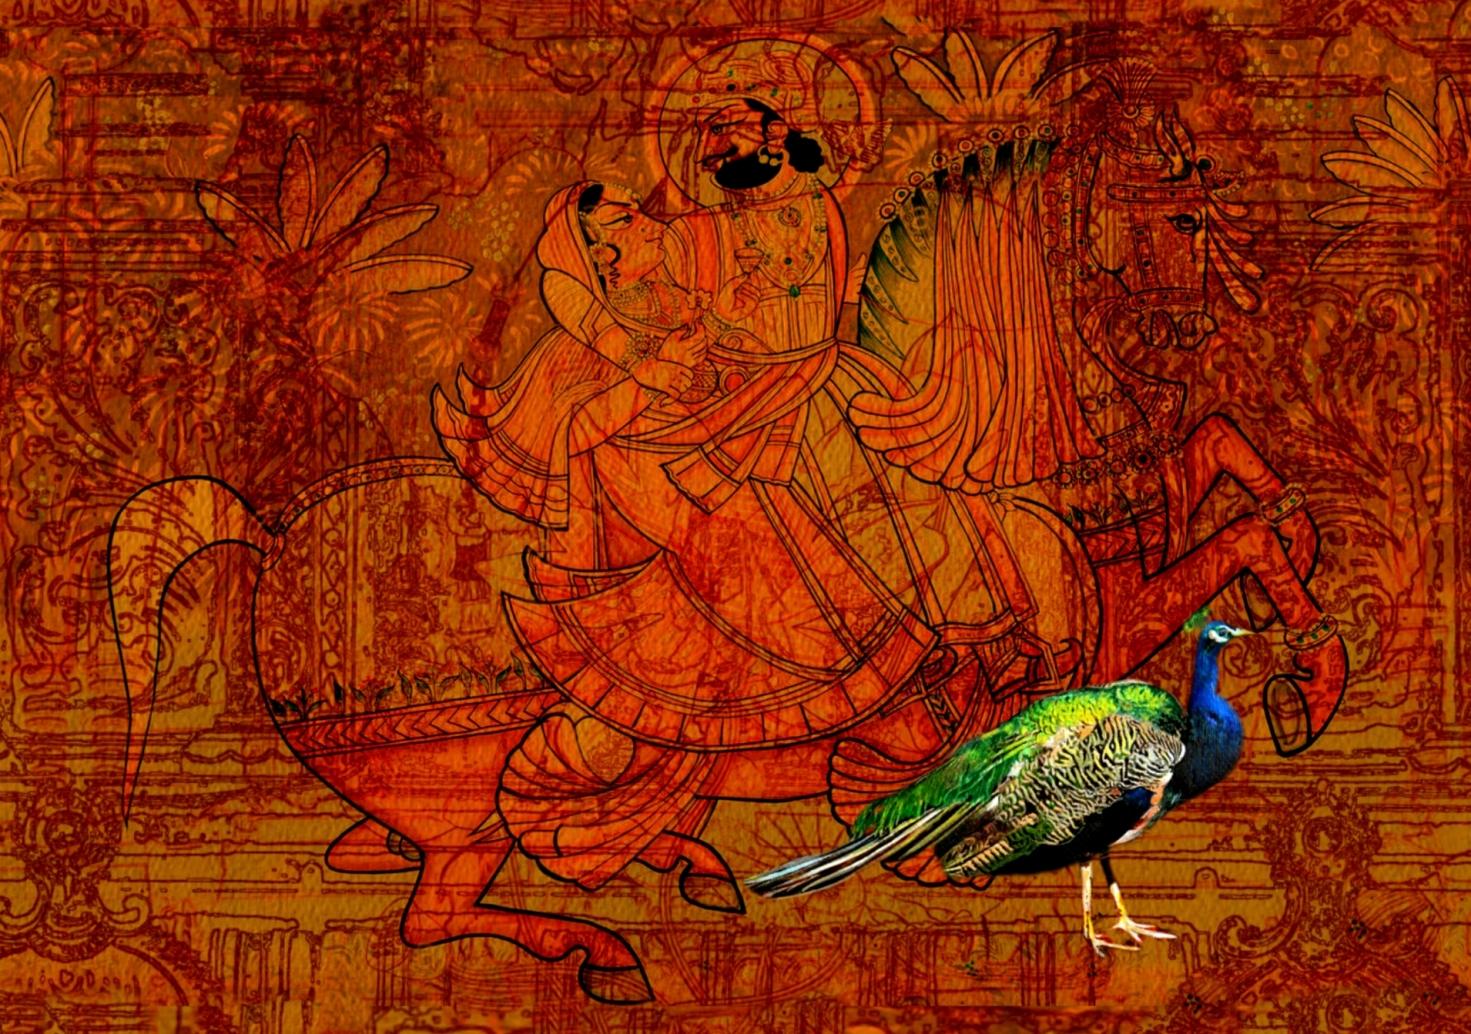 Srinivas Pulagam Animal Painting - Uncounted Remembrance, Watercolour & Gouache on Paper by Indian Artist"In Stock" 